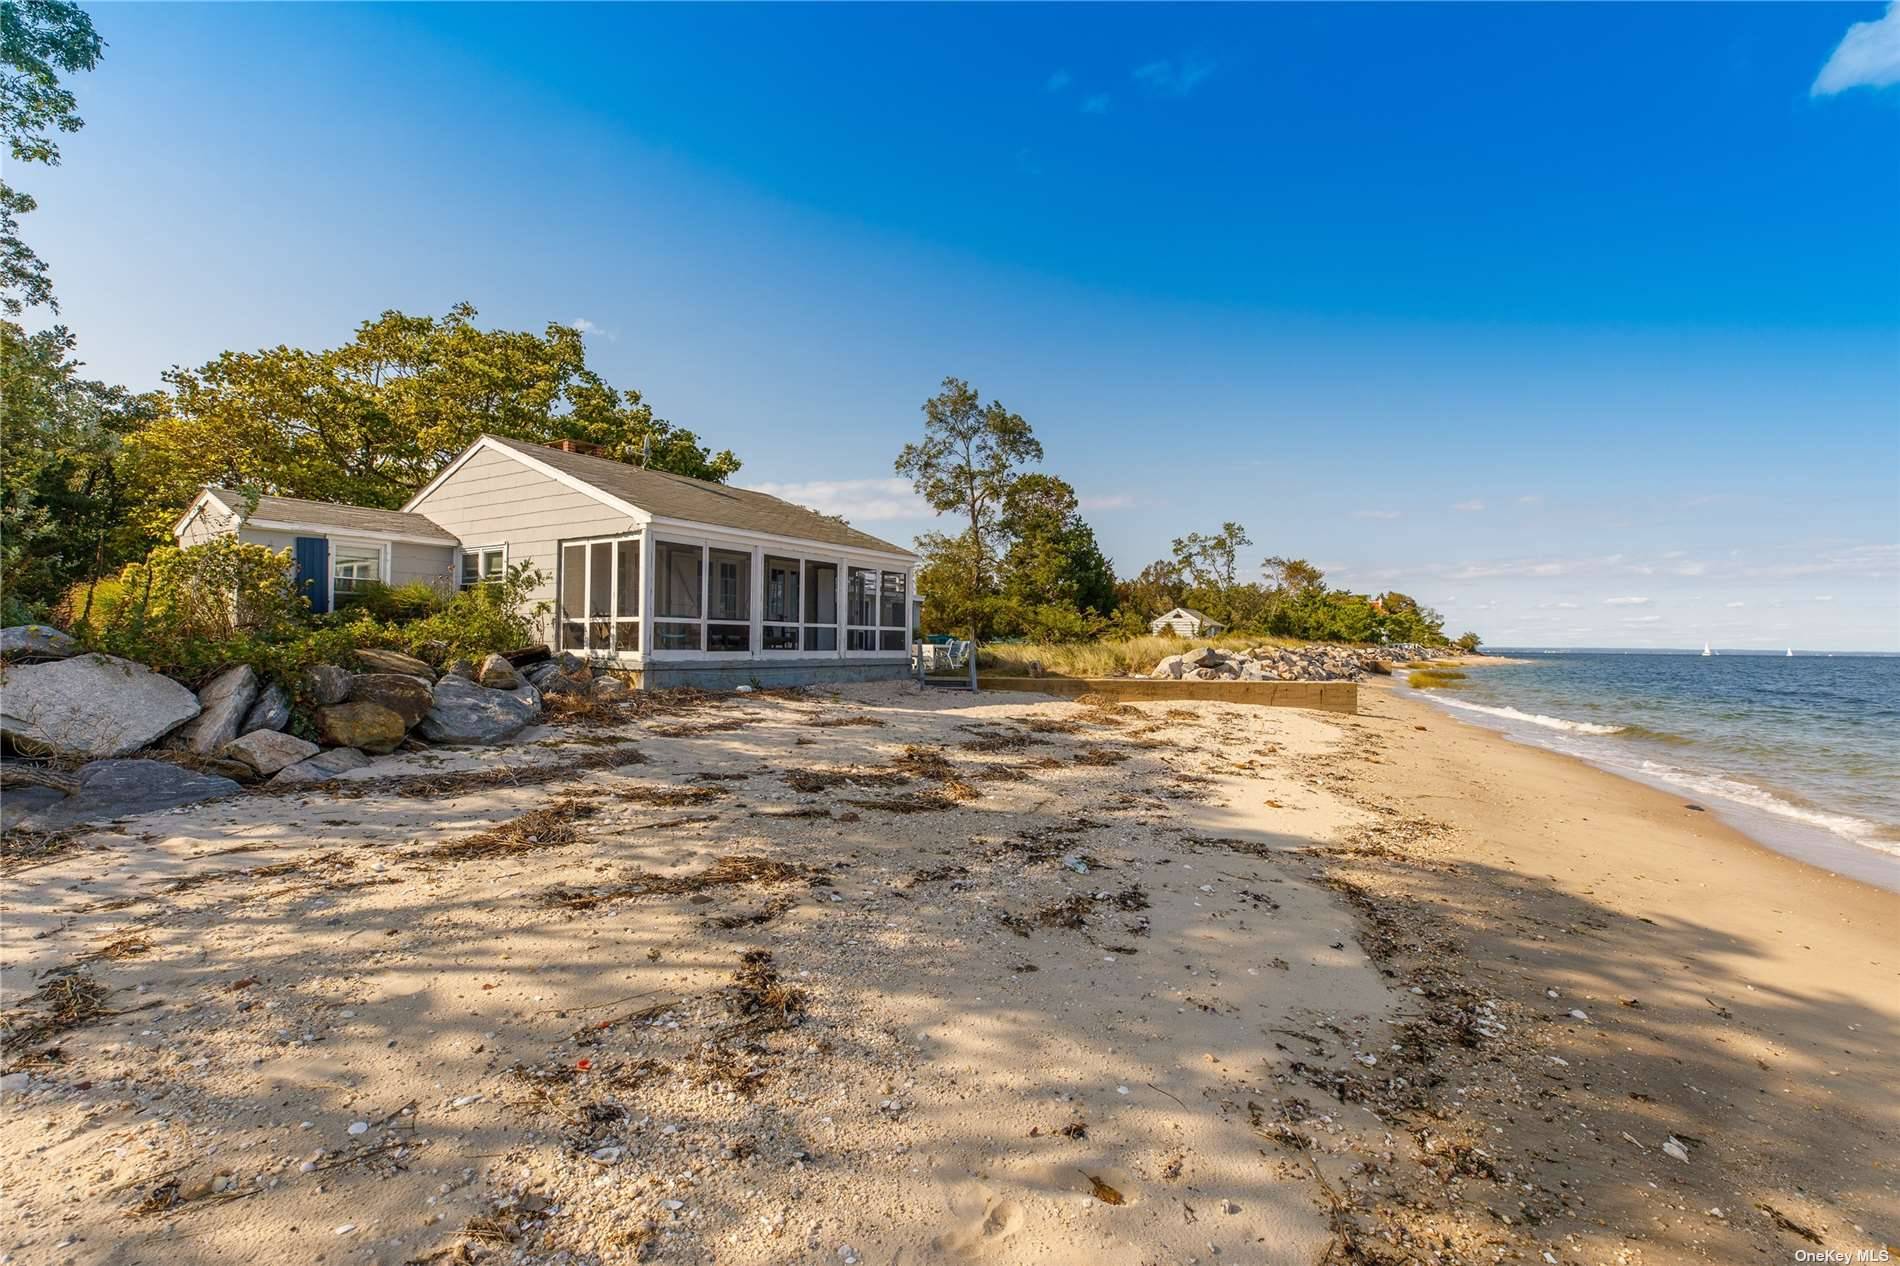 Welcome to Seaview, a charming 3 bedroom waterfront beach bungalow with 400ft.